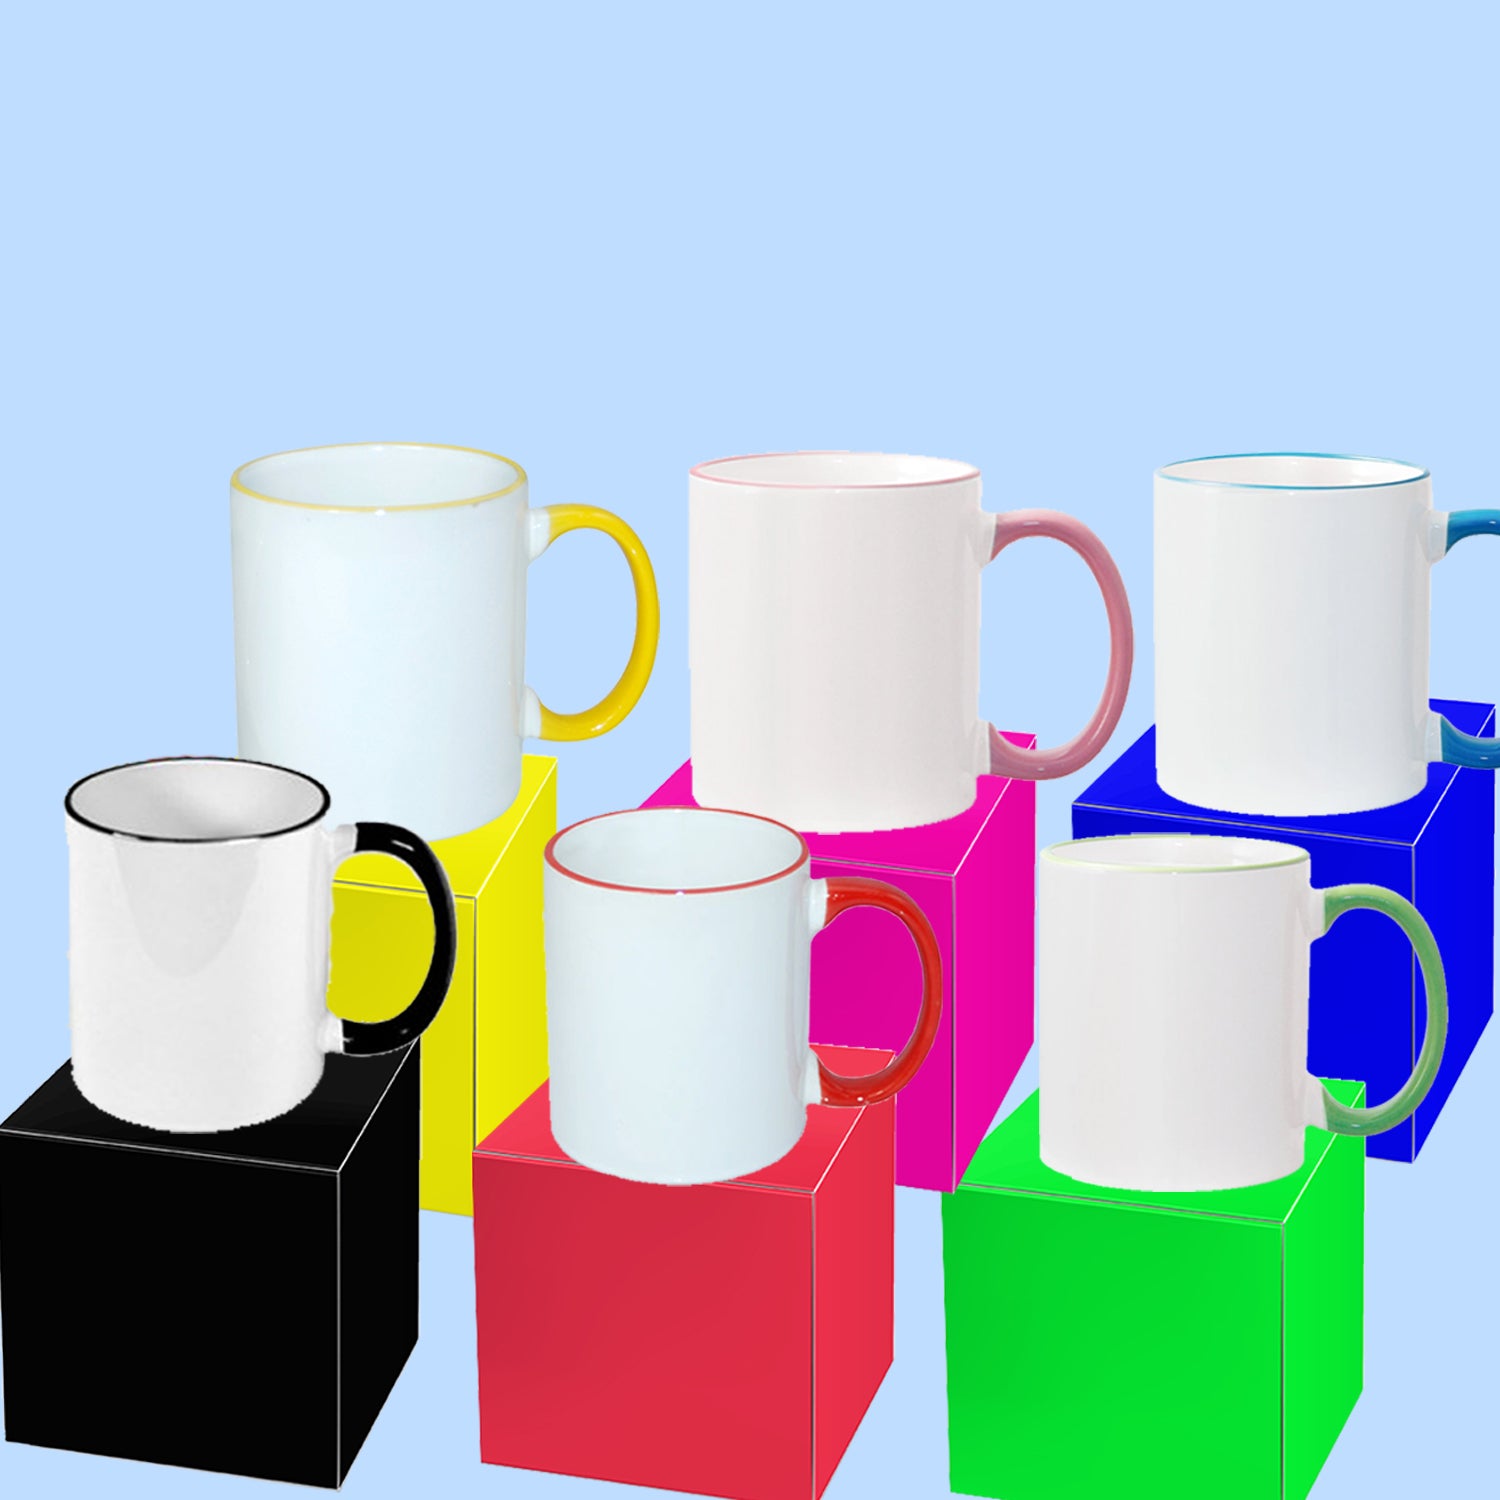 Rim & Handle Mugs: Start Creating Your Own Personalized Sublimation Masterpieces